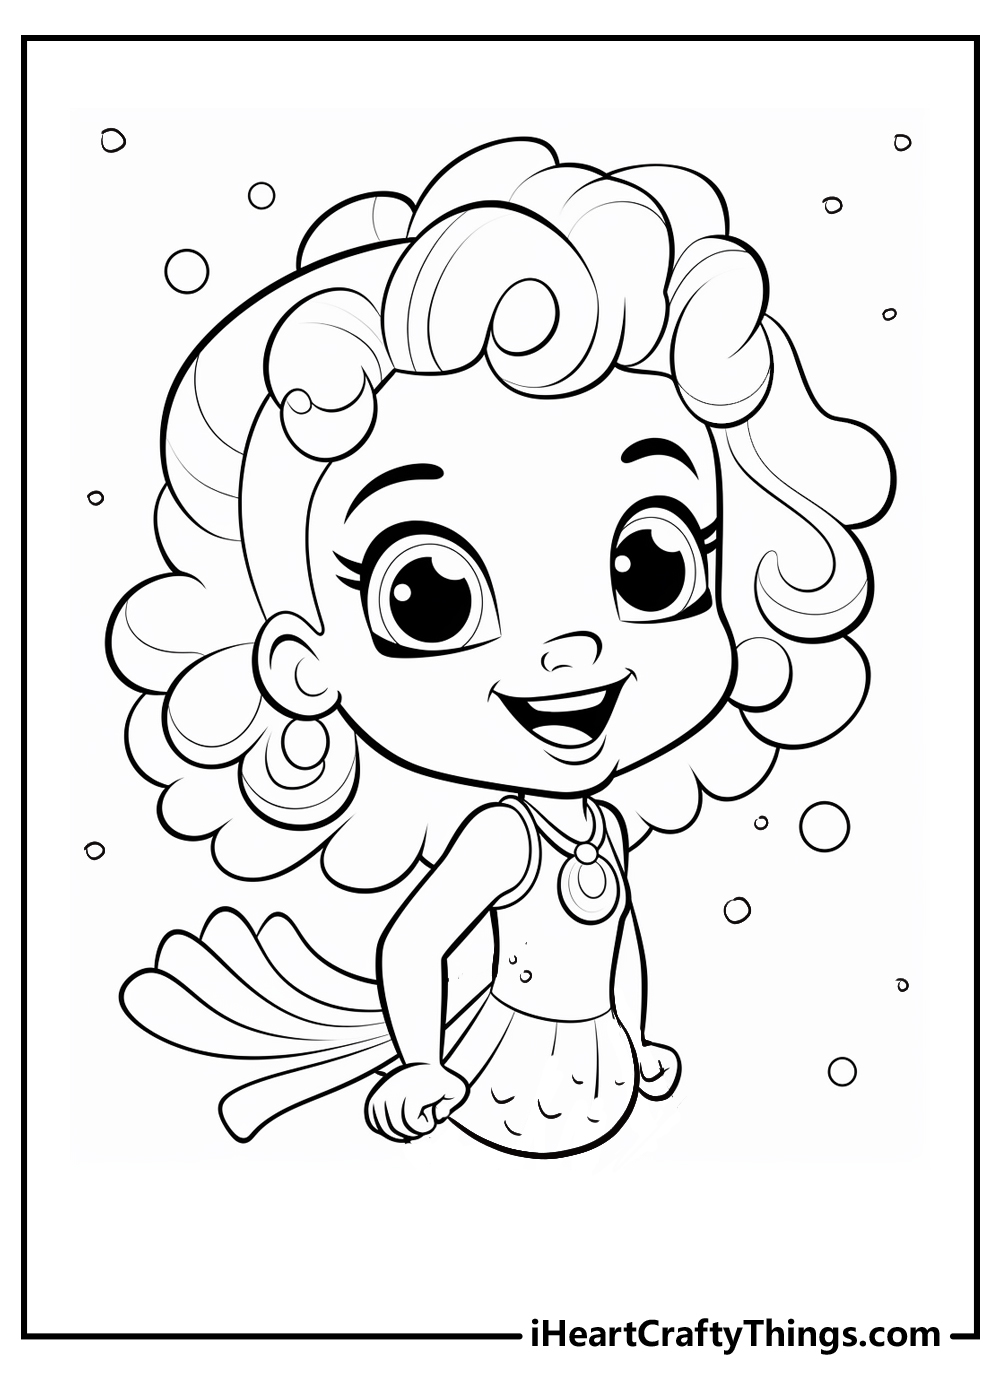 Bubble guppies coloring pages free printables